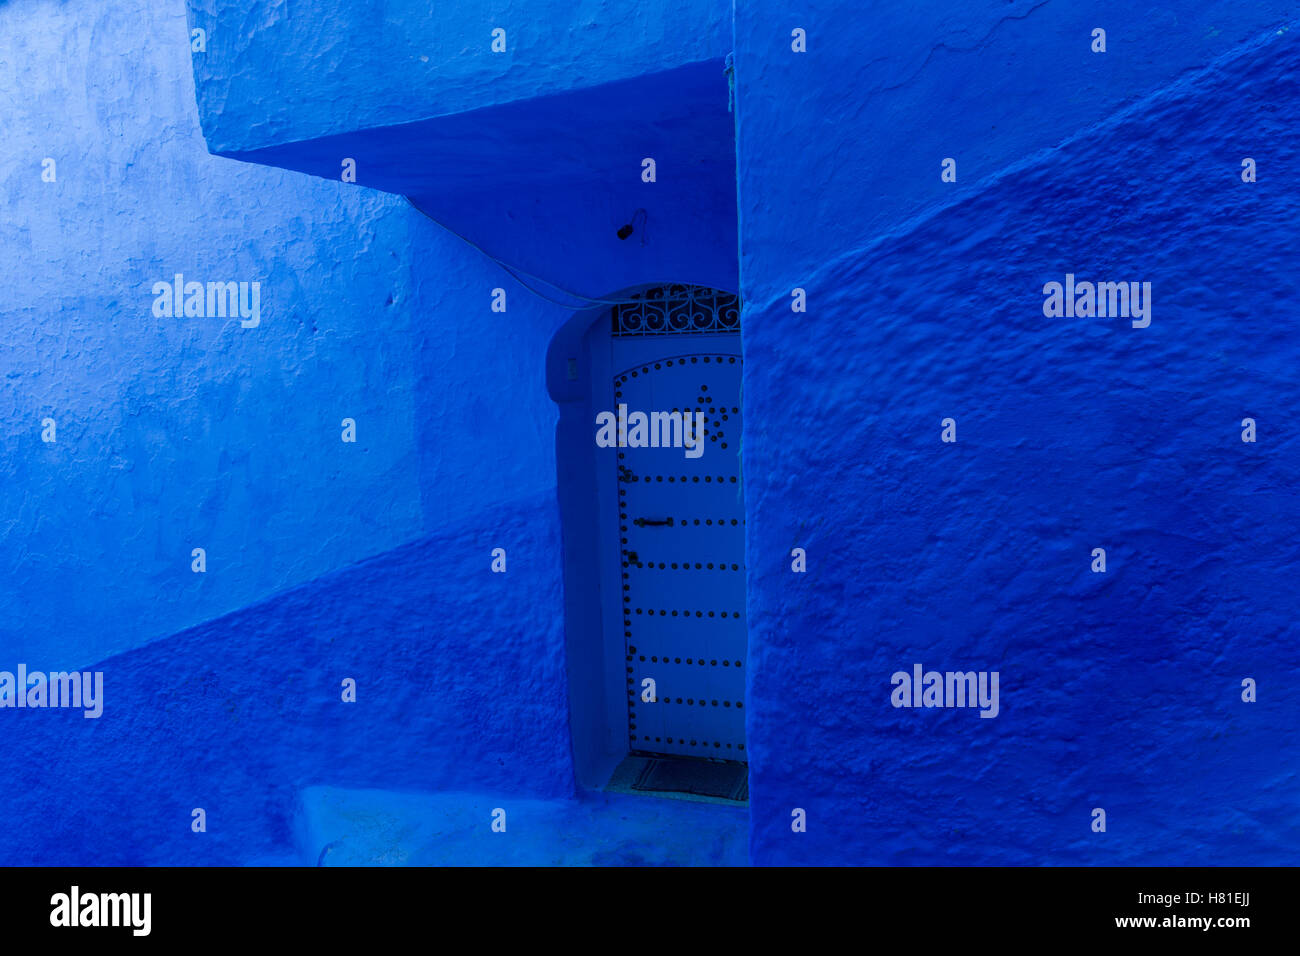 Morocco,Chefchaouen, architecture of indigo limewashed buildings, doorway in blue Stock Photo